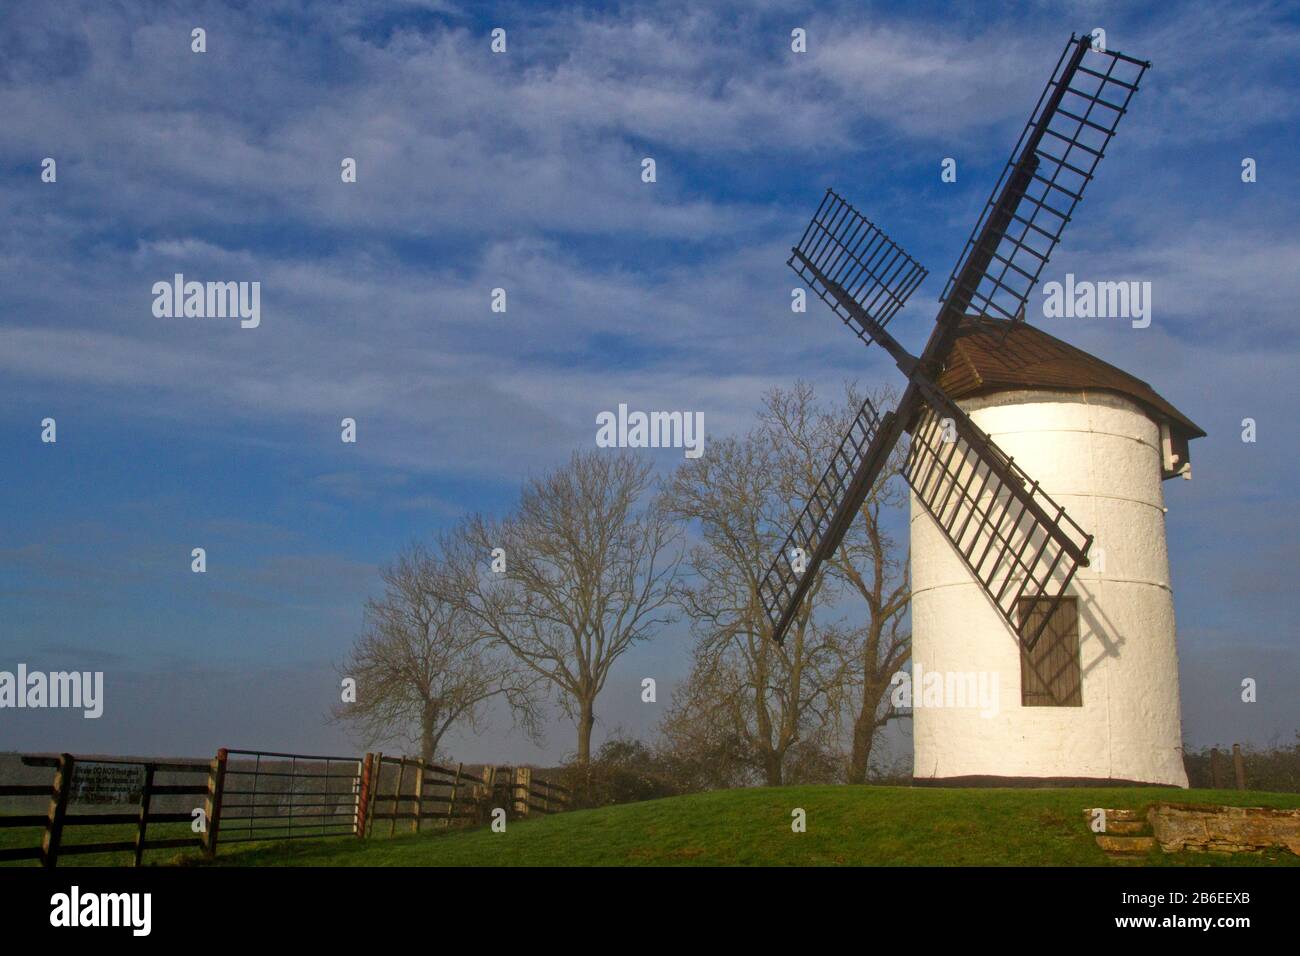 A misty winter view of Ashton windmill, a tower mill in Chapel Allerton, Somerset, England Stock Photo